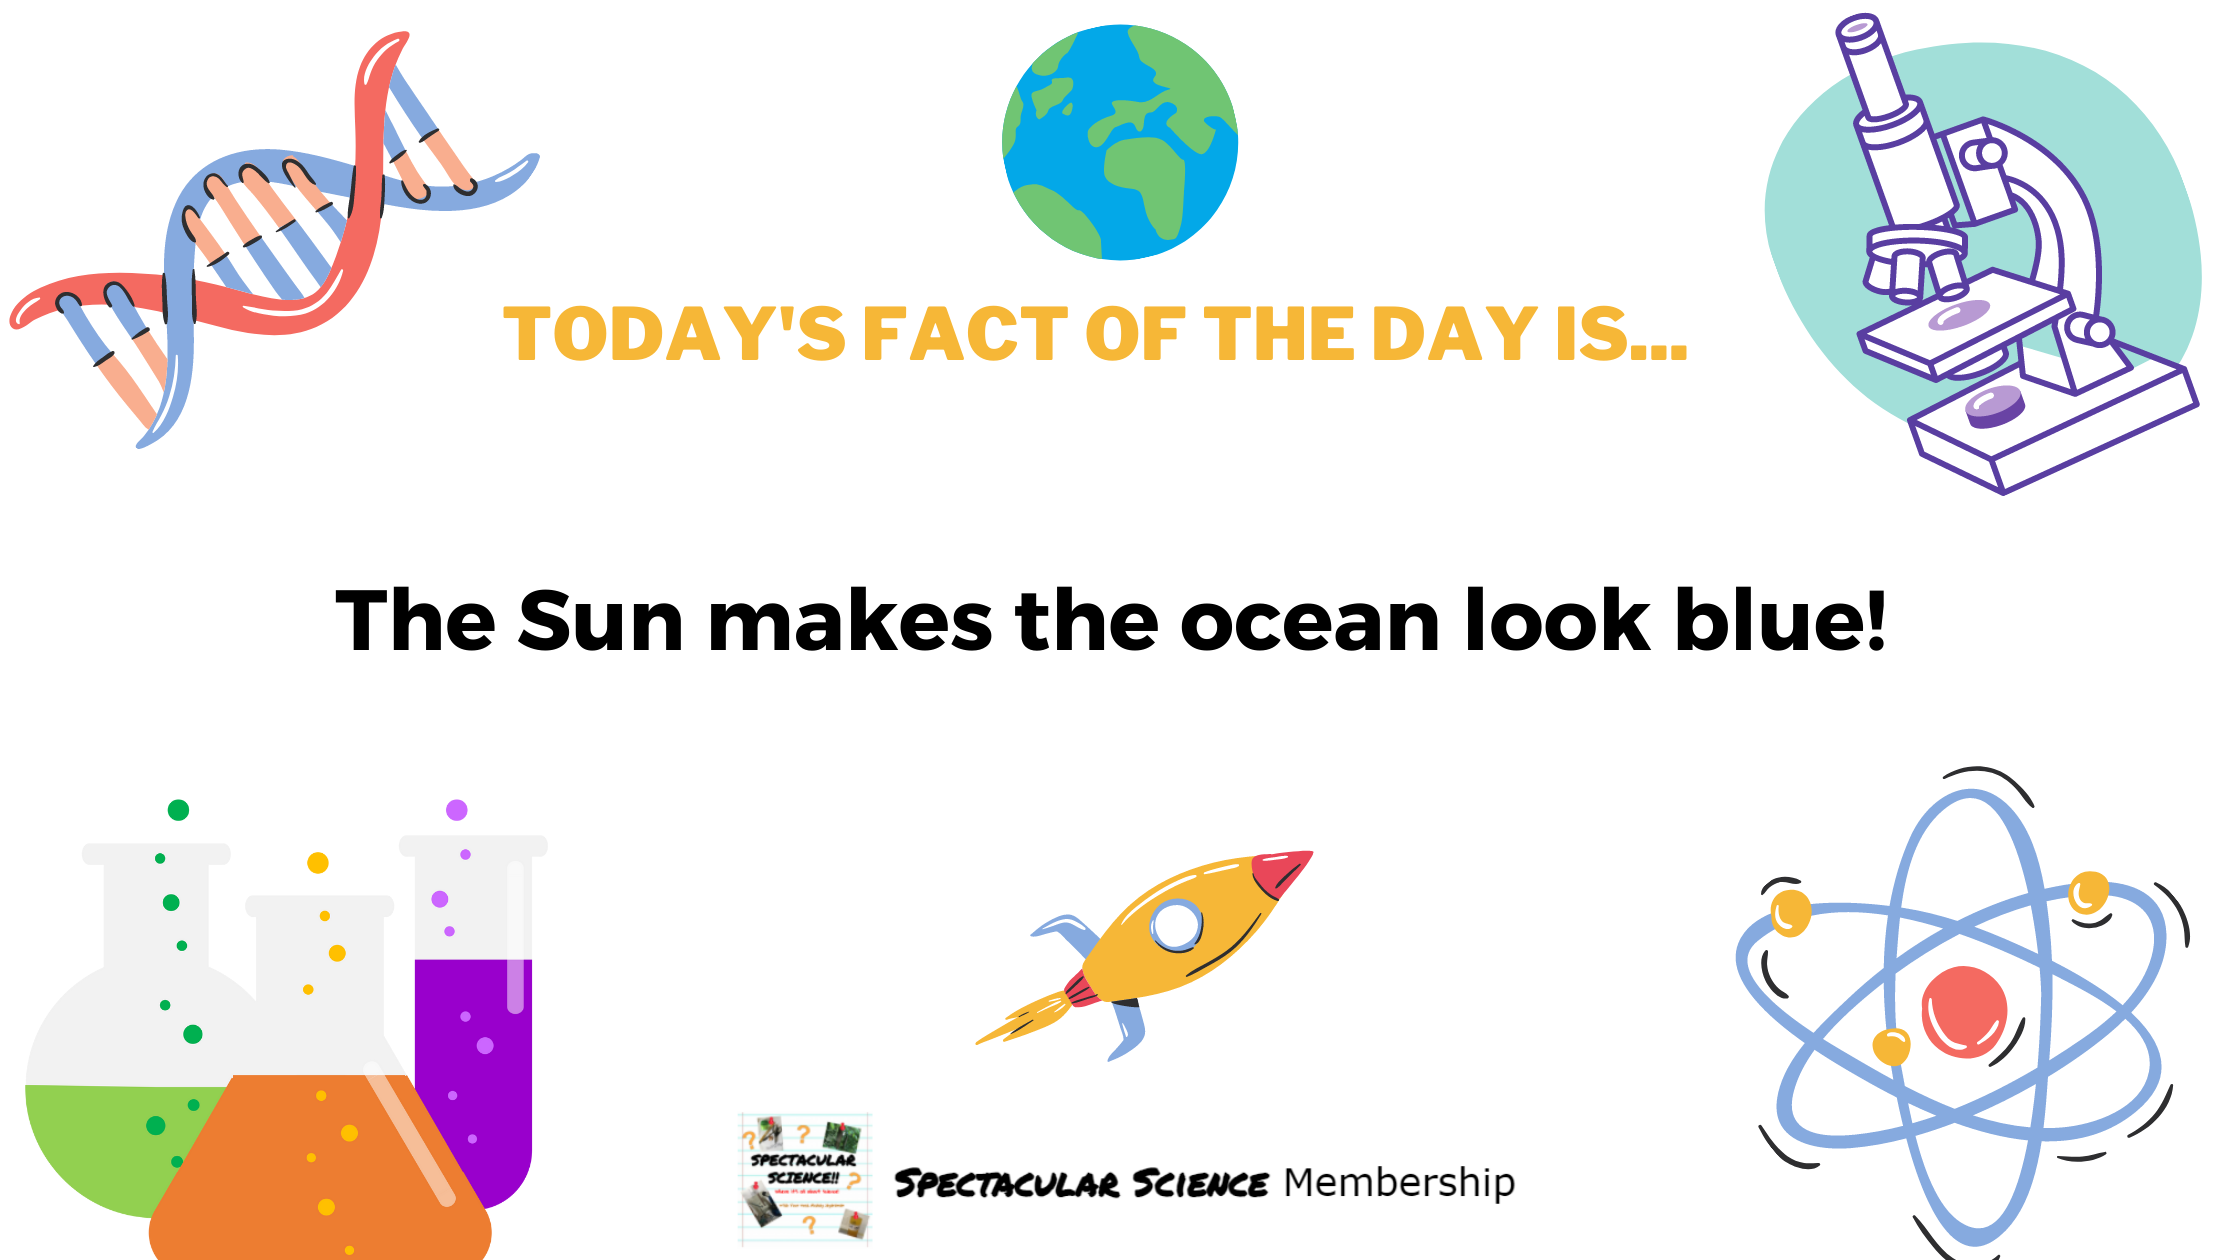 Fact of the Day Image Dec. 3rd